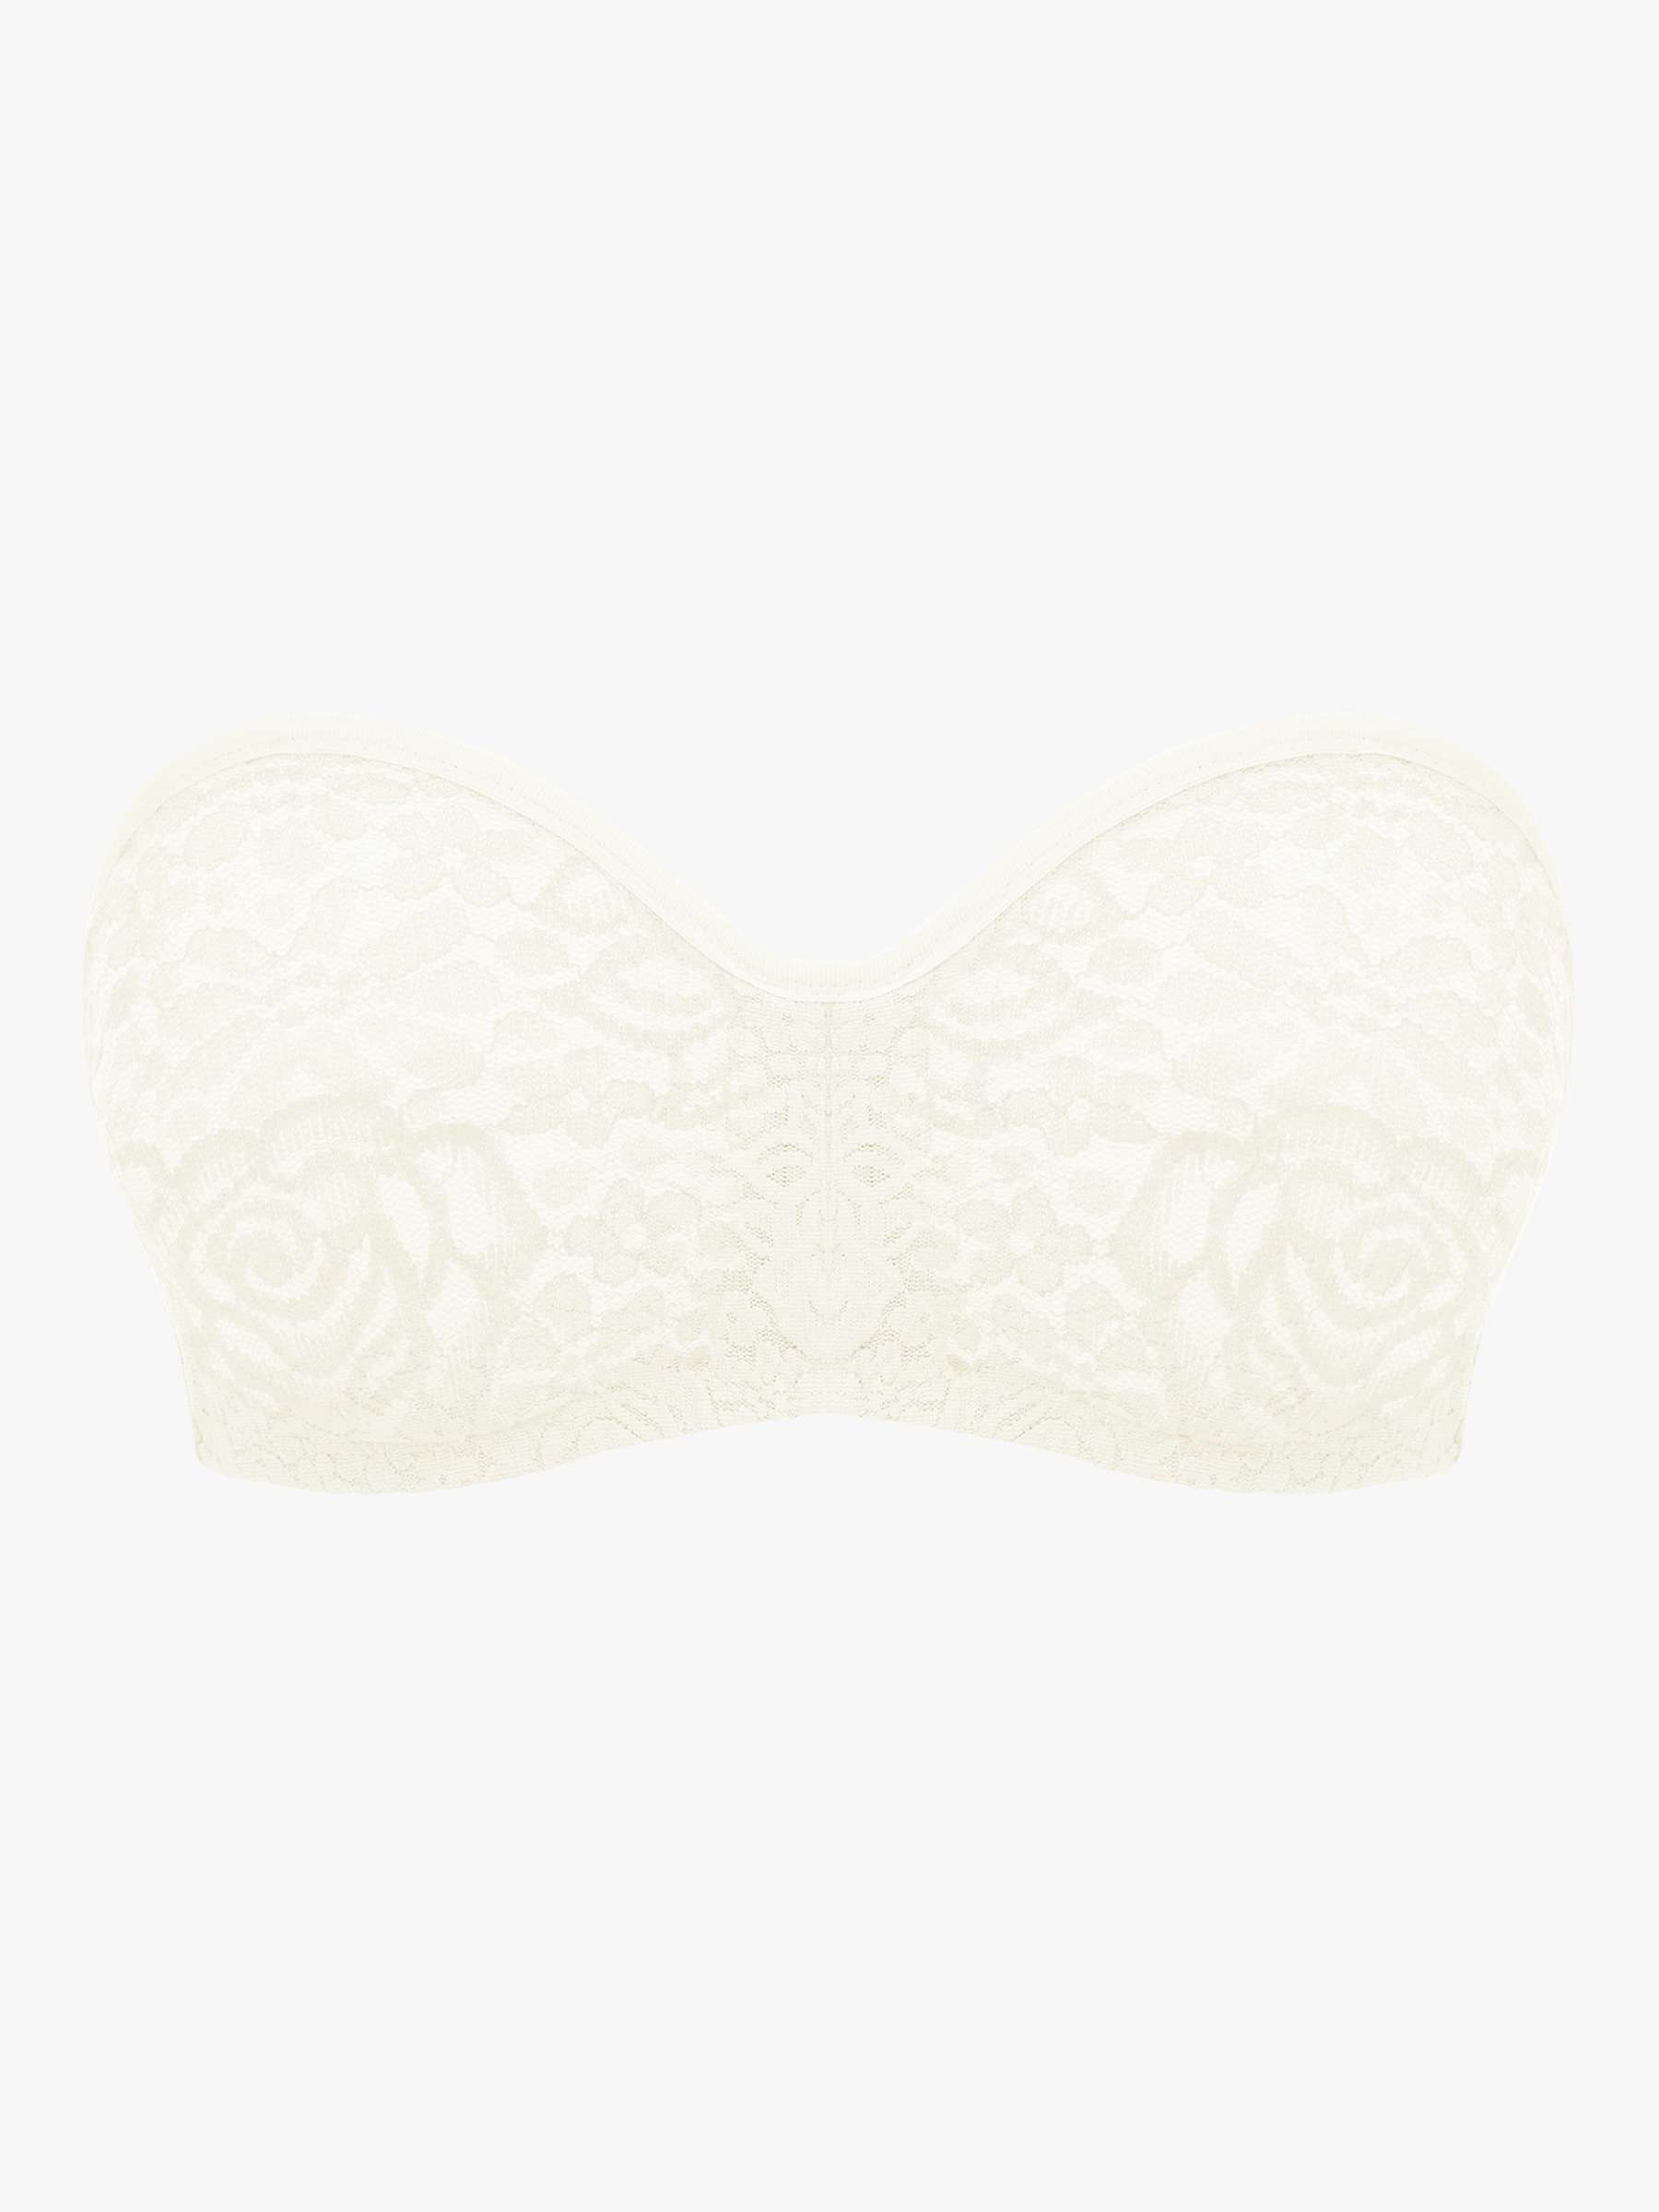 Buy Wacoal Halo Lace Moulded Strapless Bra Online at johnlewis.com